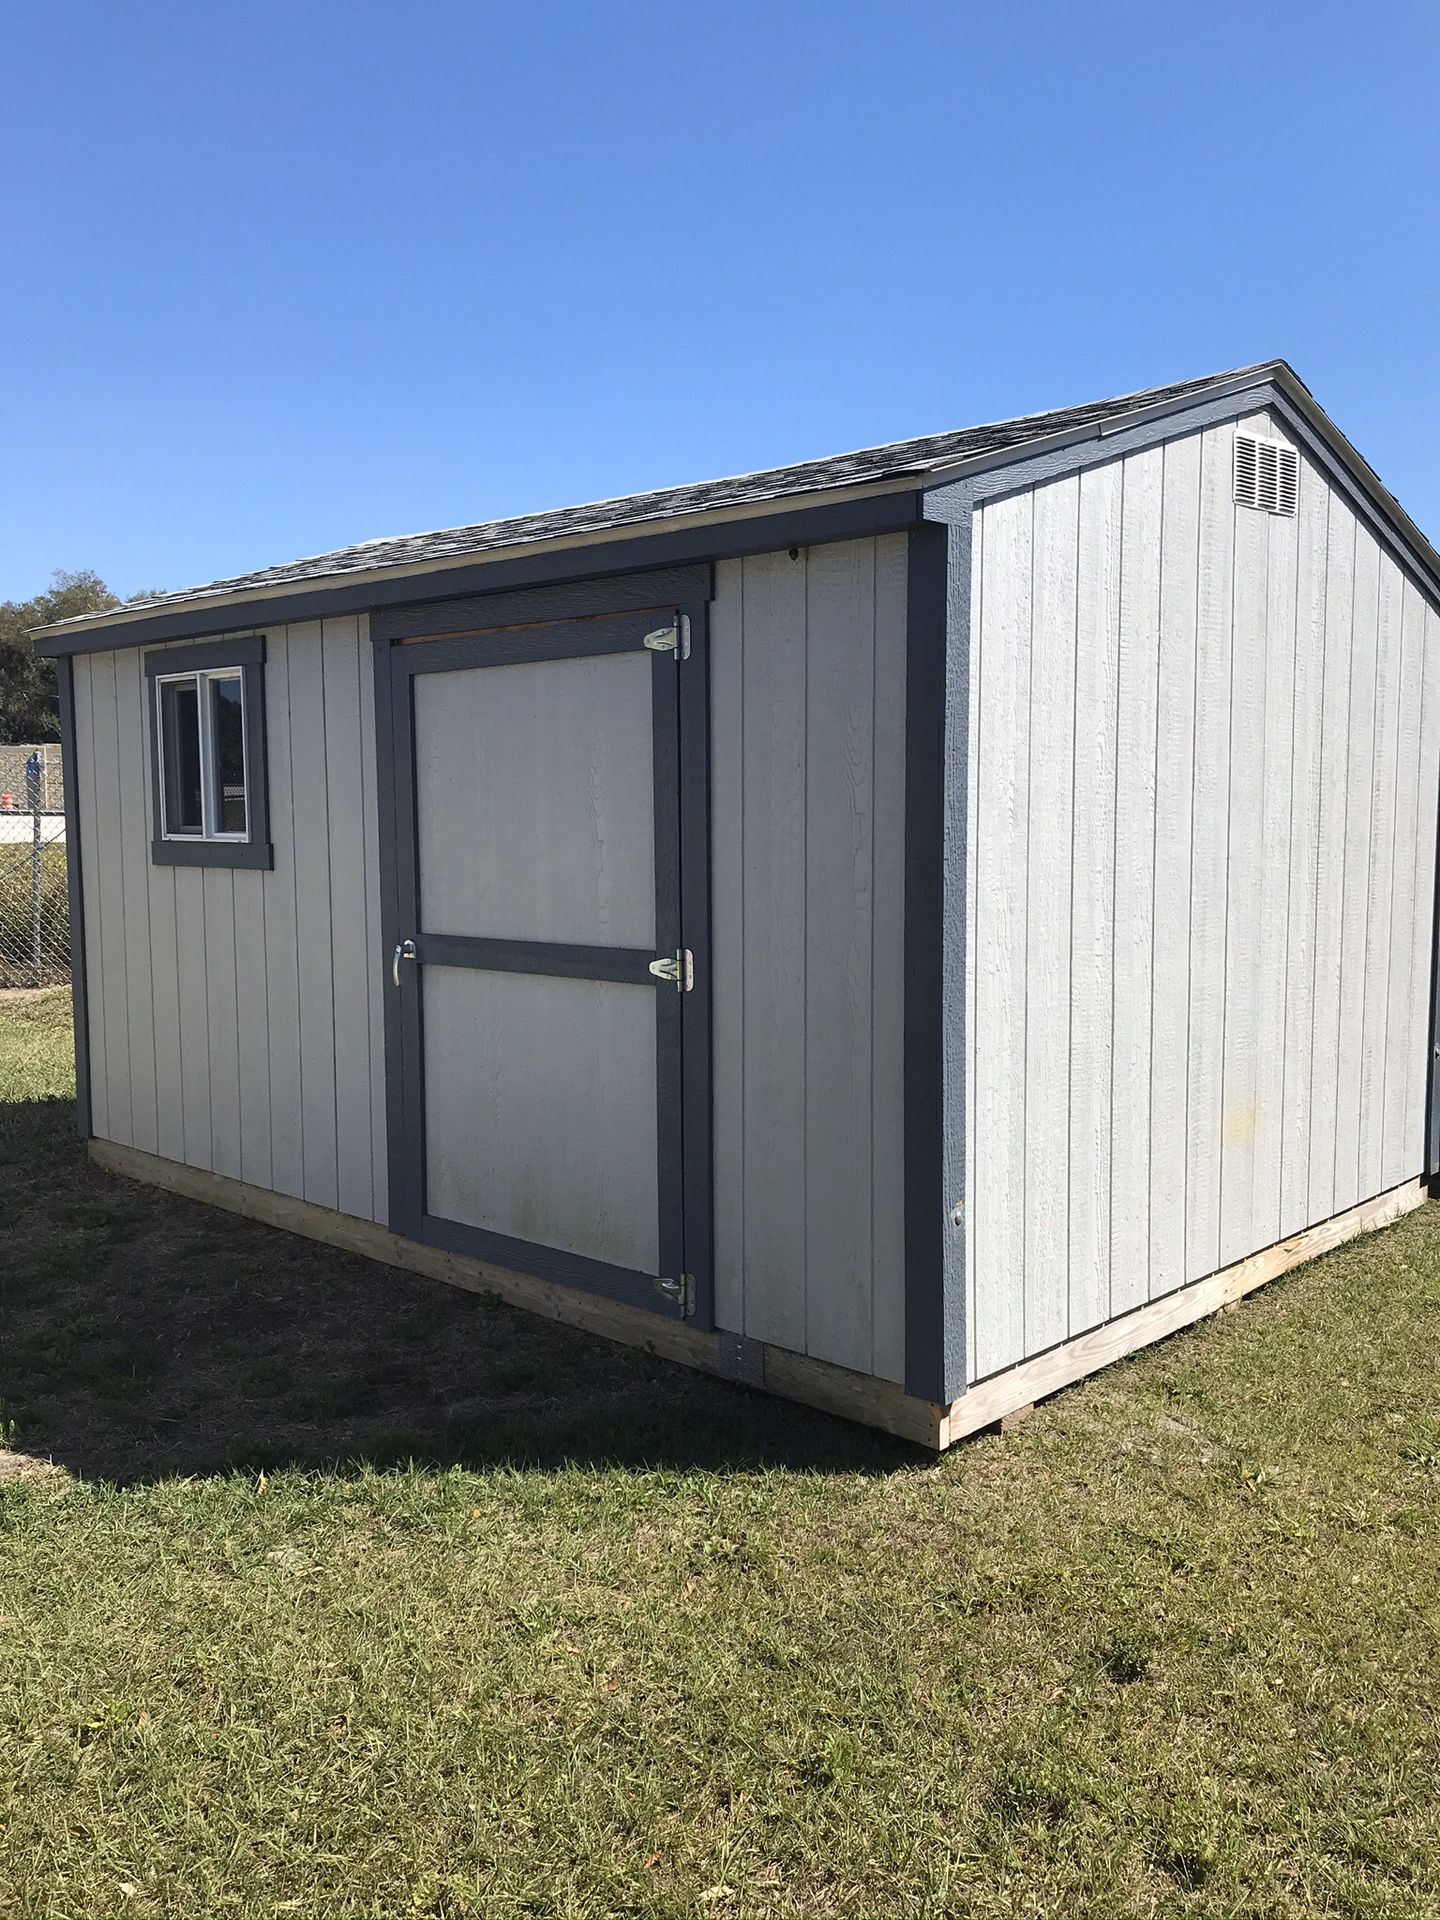 Used 10x14 shed